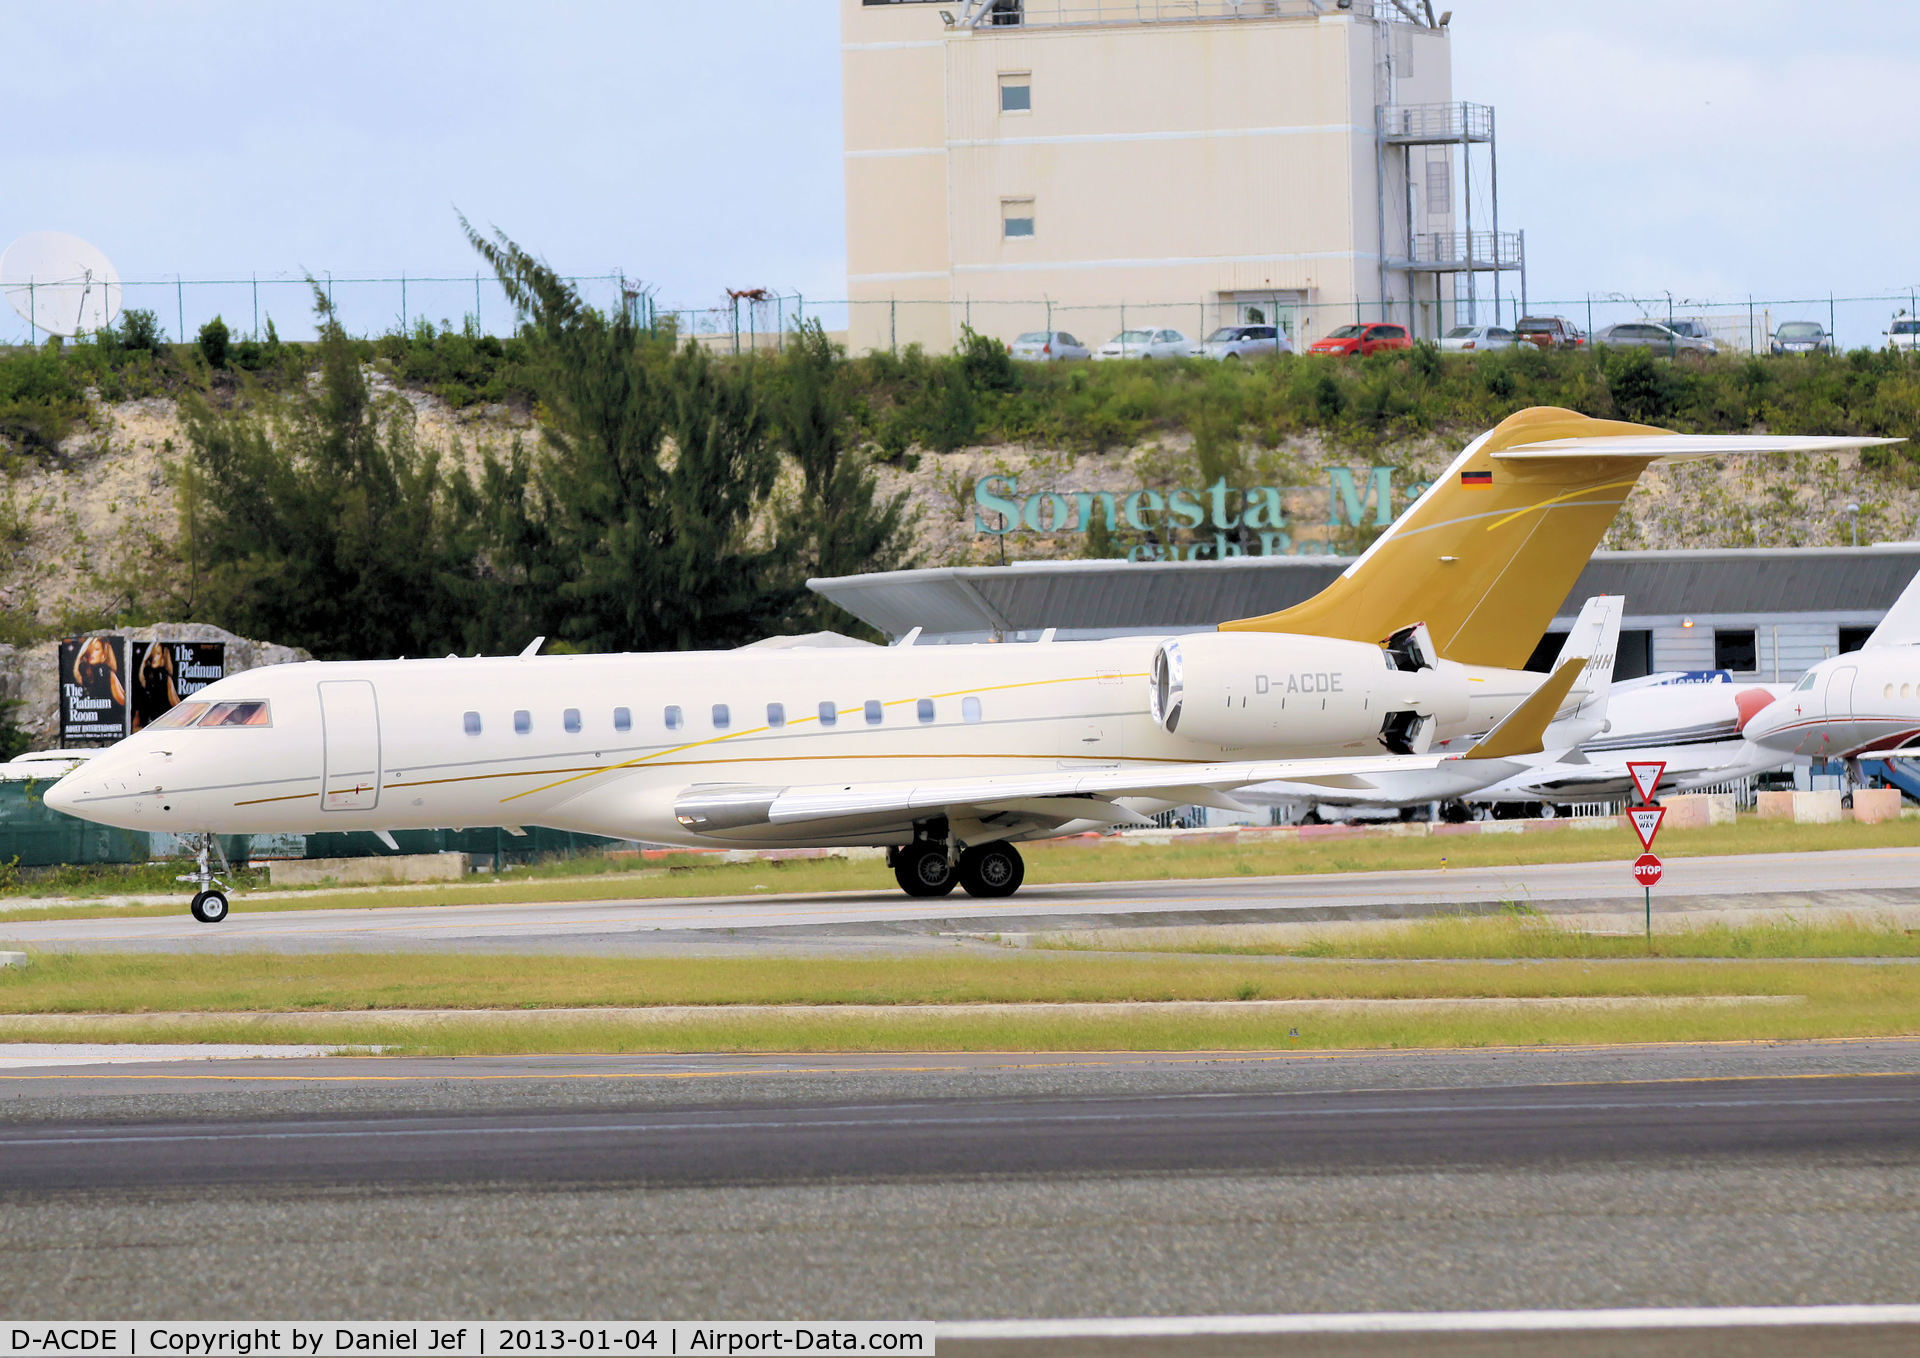 D-ACDE, 2010 Bombardier BD-700-1A11 Global Express C/N 9405, D-ACDE